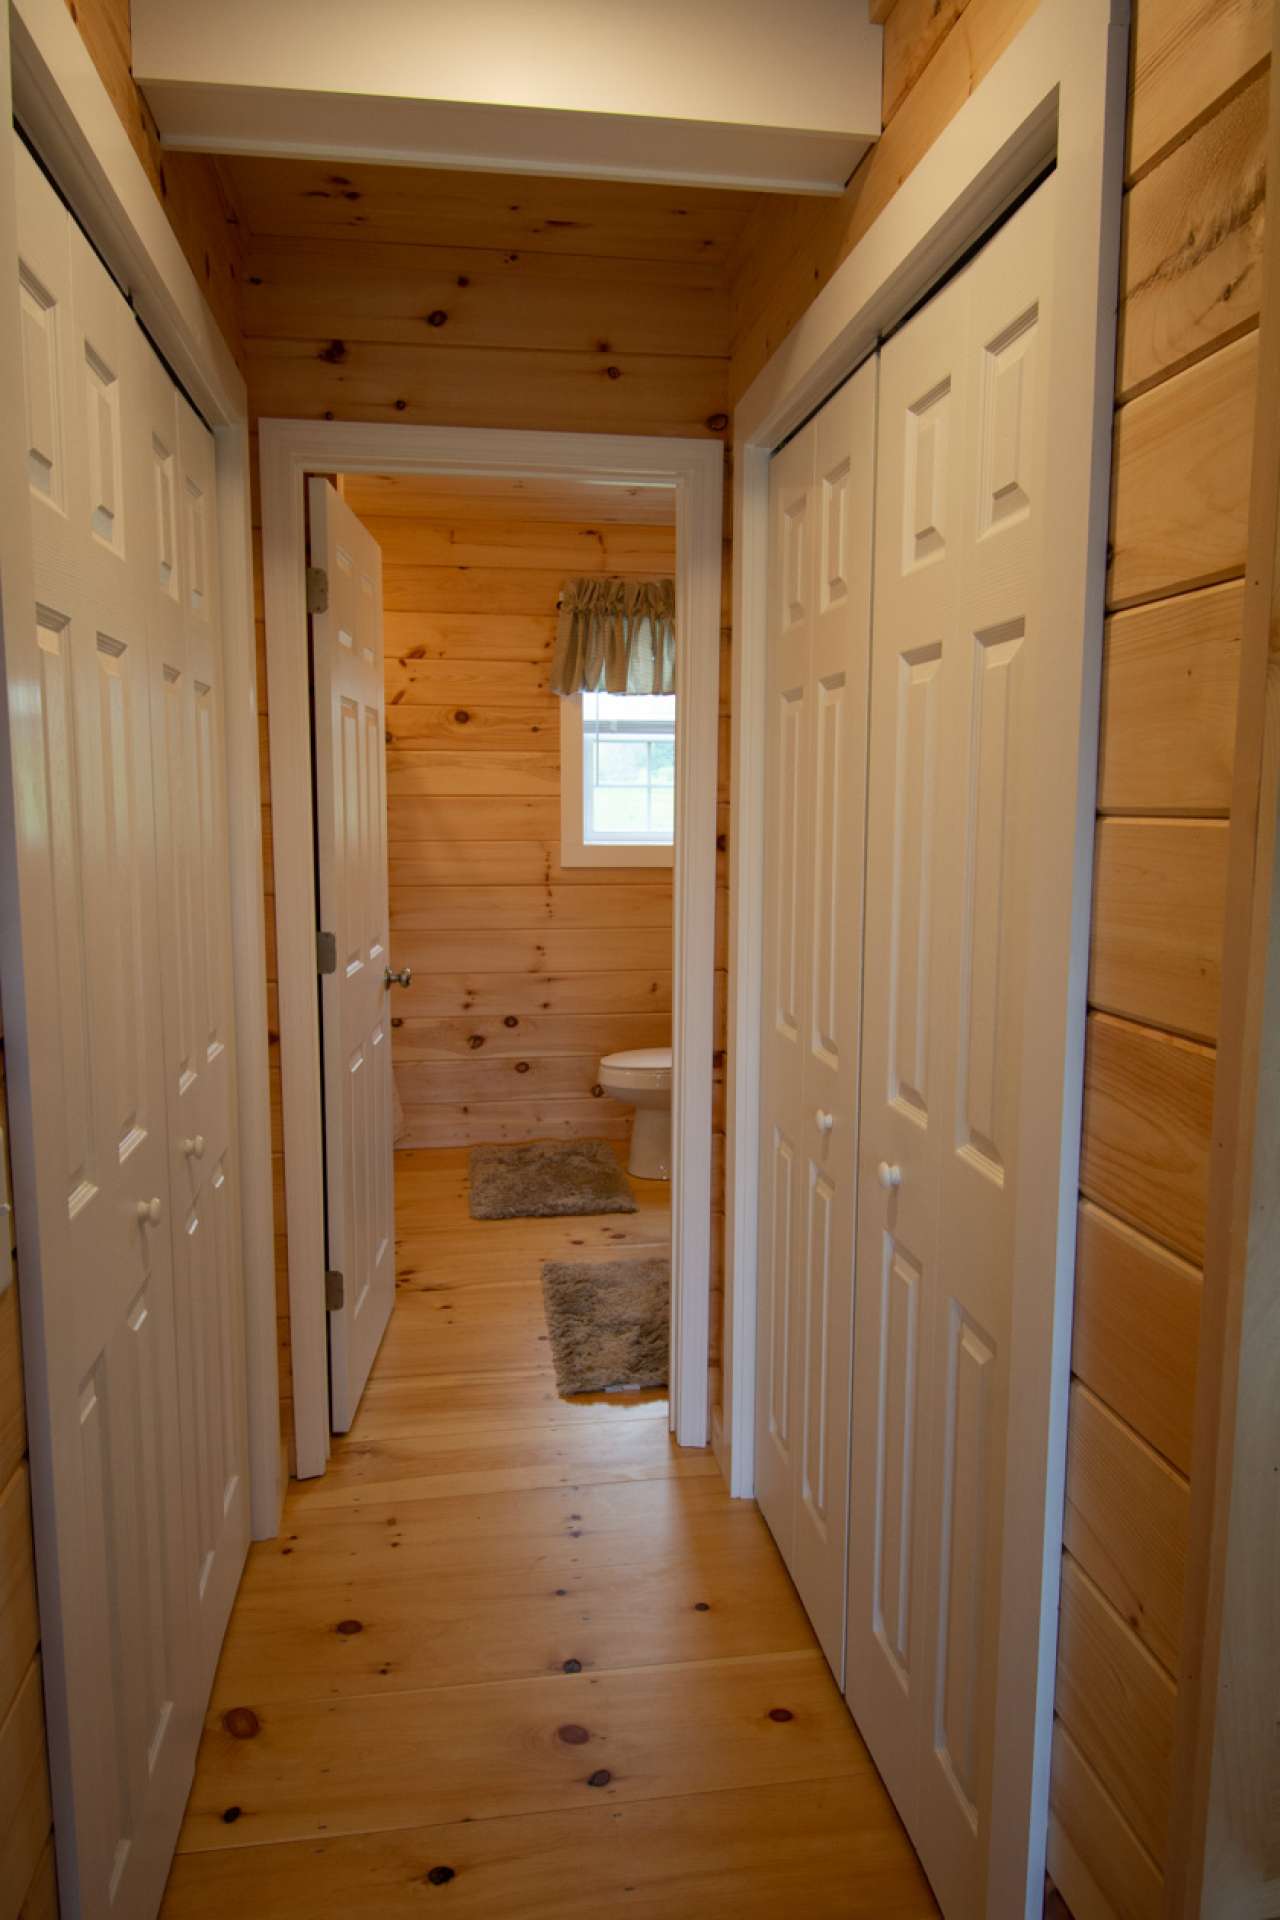 Second level bathroom with closets on each side as you enter.